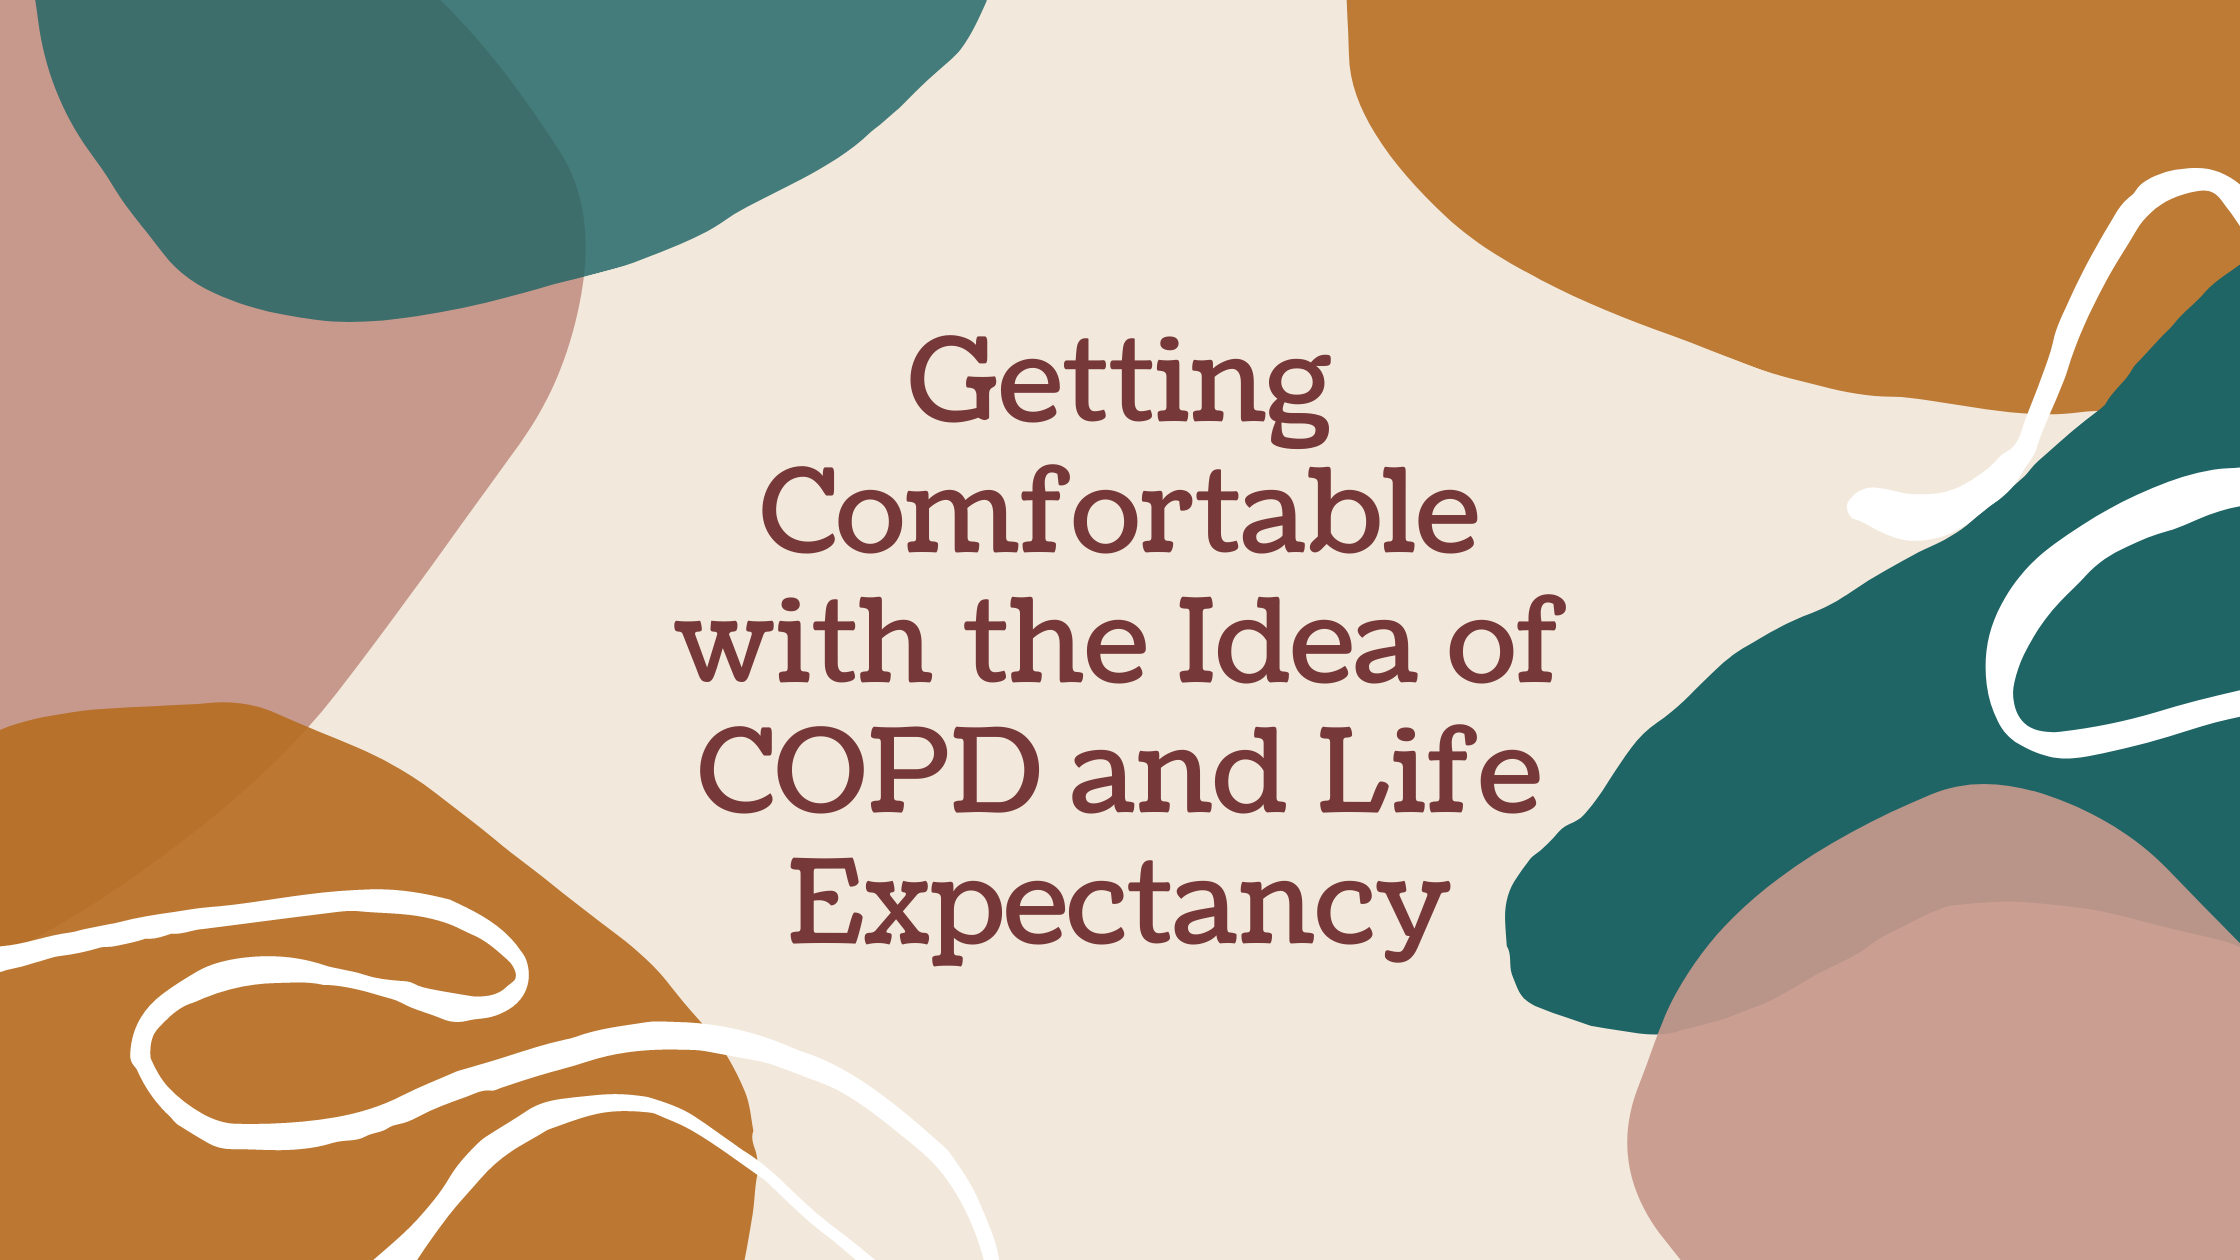 Getting Comfortable with the Idea of COPD and Life Expectancy